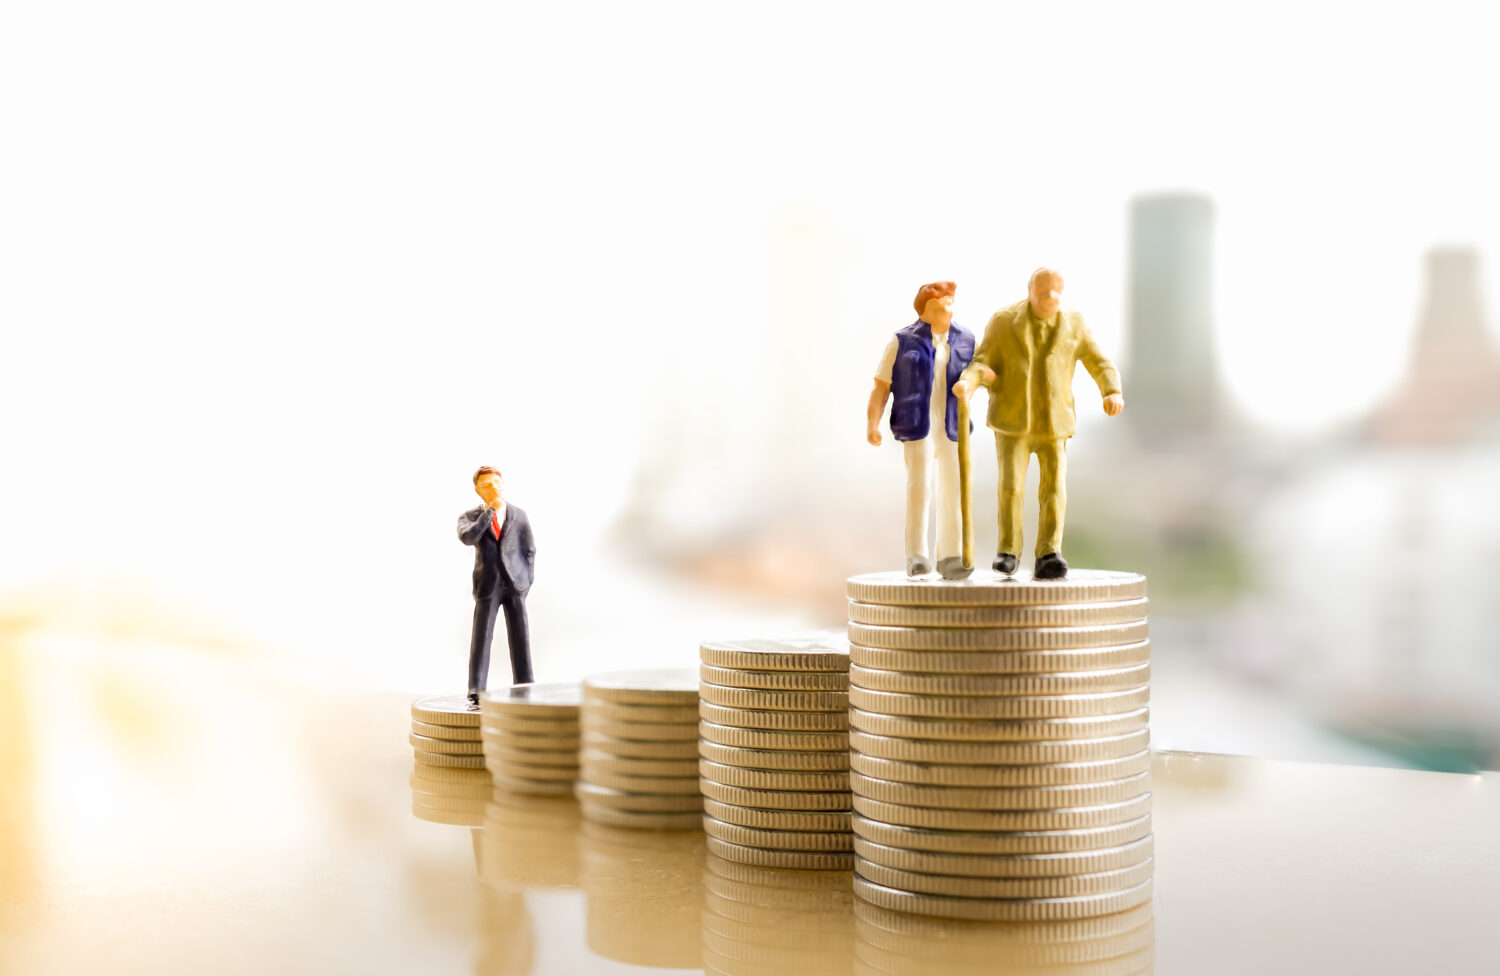 old-couple-figure-standing-top-coin-stack-with-city-backgrounds